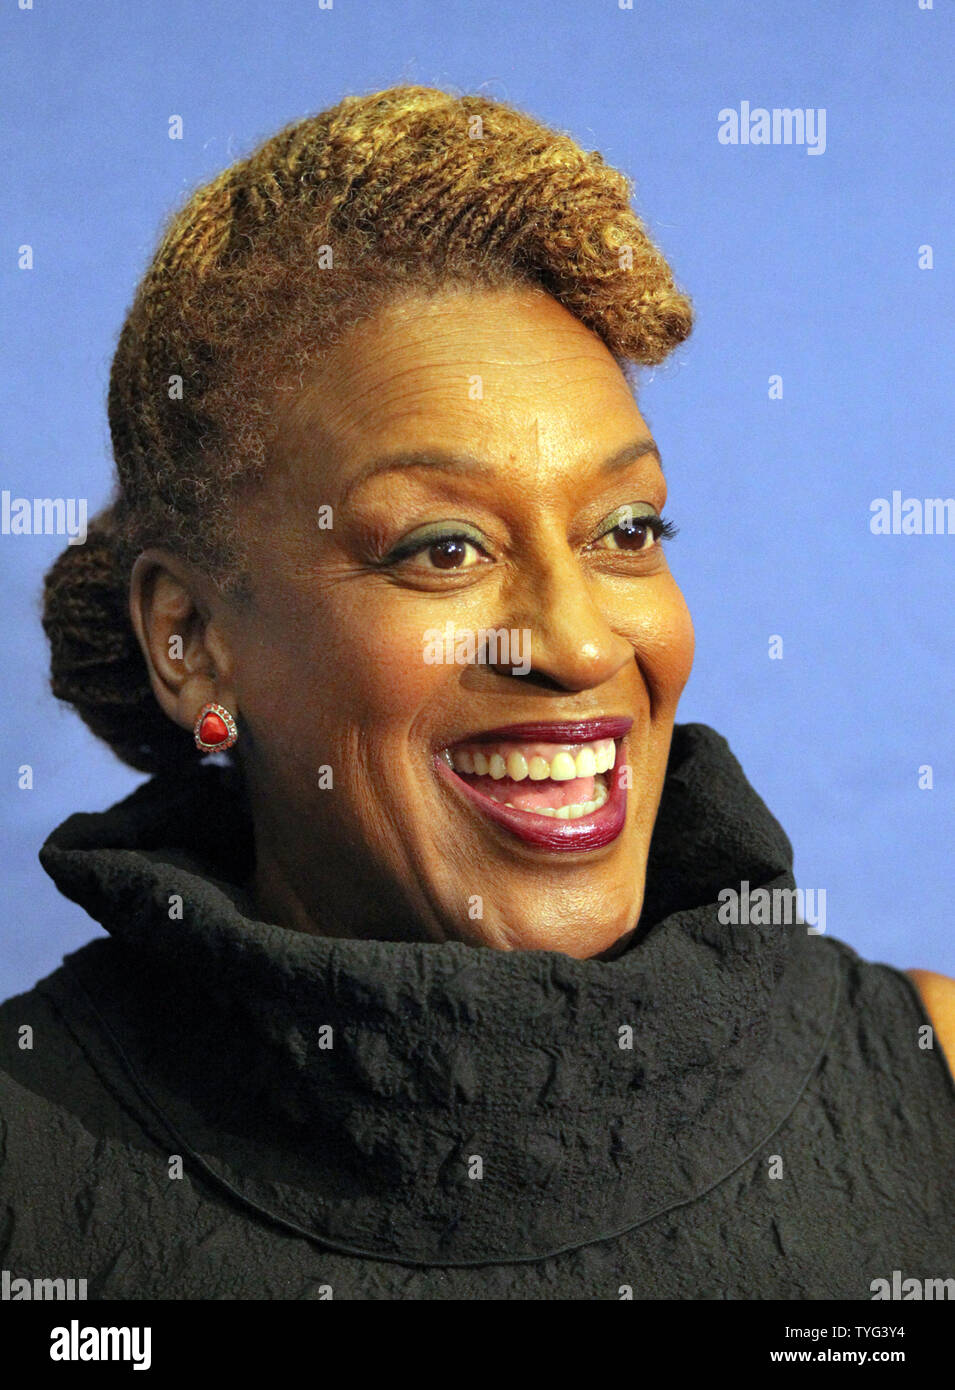 Actor C. C. H. Pounder arrives  on the red carpet at the National WWII Museum in New Orleans for the premiere of the new television series 'NCIS: New Orleans' airing on CBS this fall, September 17, 2014.    UPI/A.J. Sisco Stock Photo